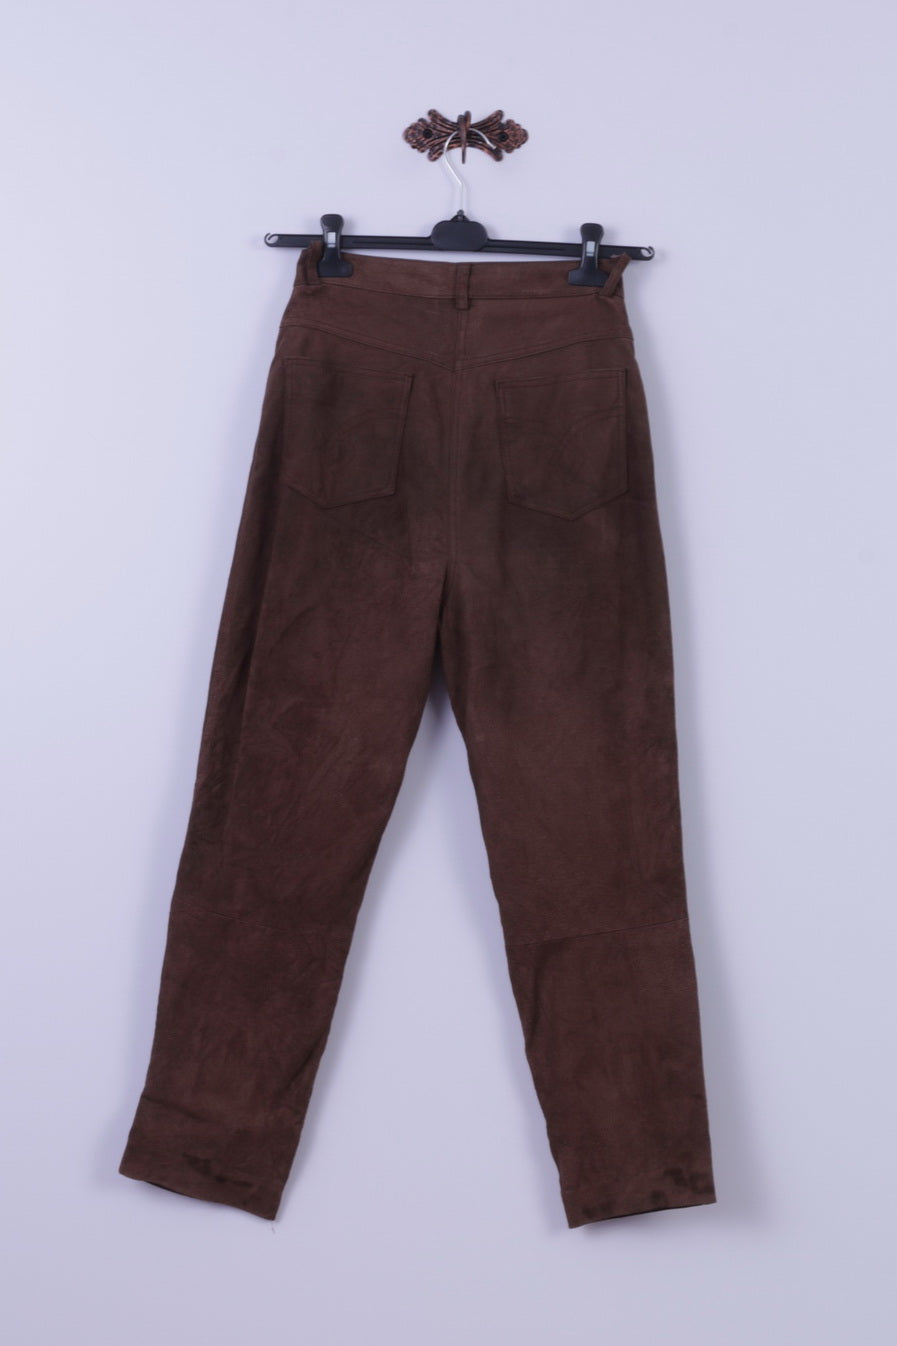 Style File Womens 10 S Trousers Brown 100% Leather Suede Retro High Waist Pants